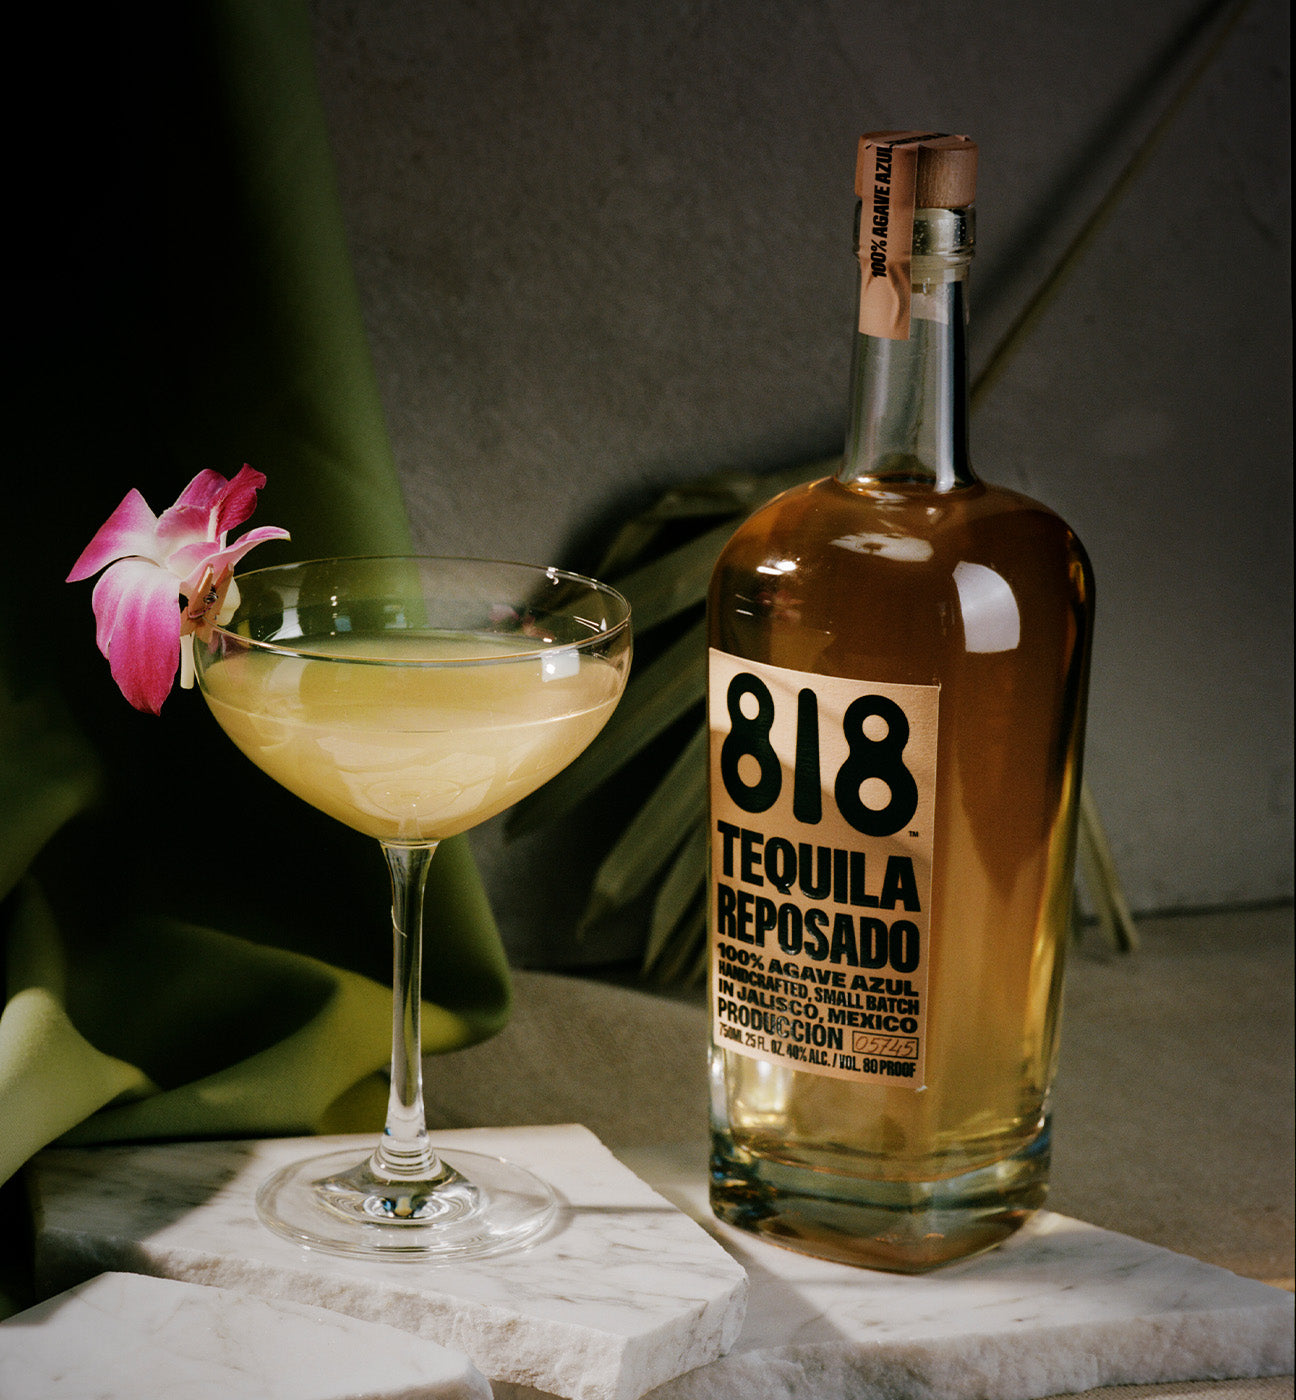 Our Award-Winning 818 Tequila